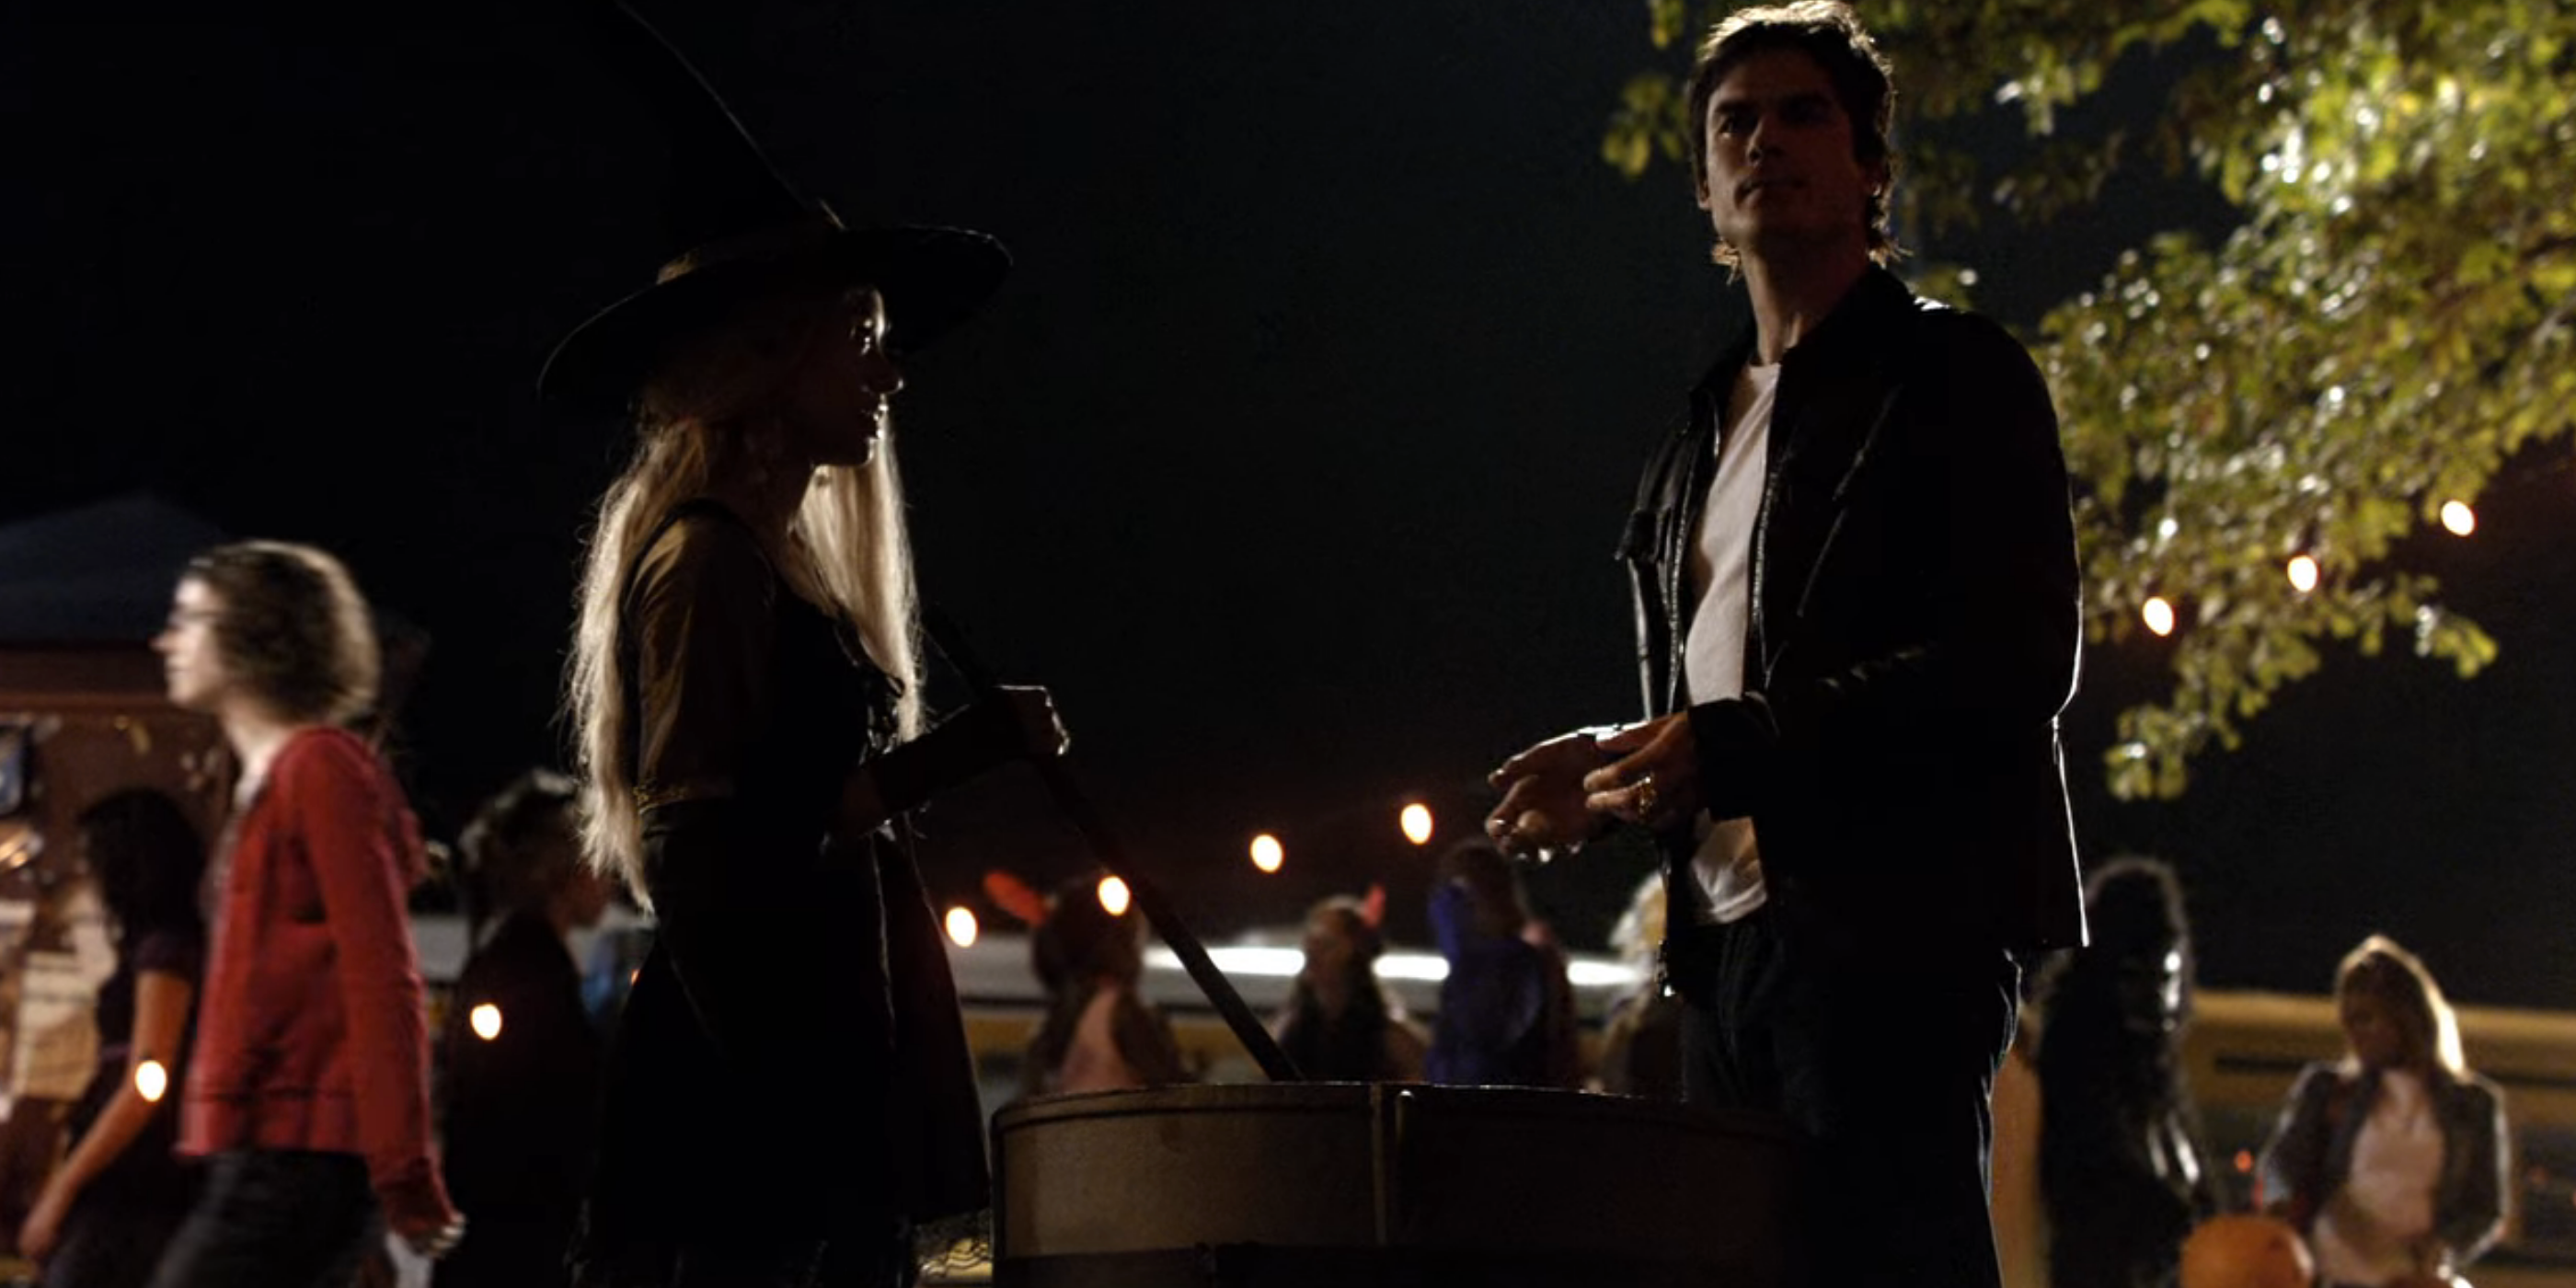 Damon and Bonnie at the Halloween Dance in The Vampire Diaries.